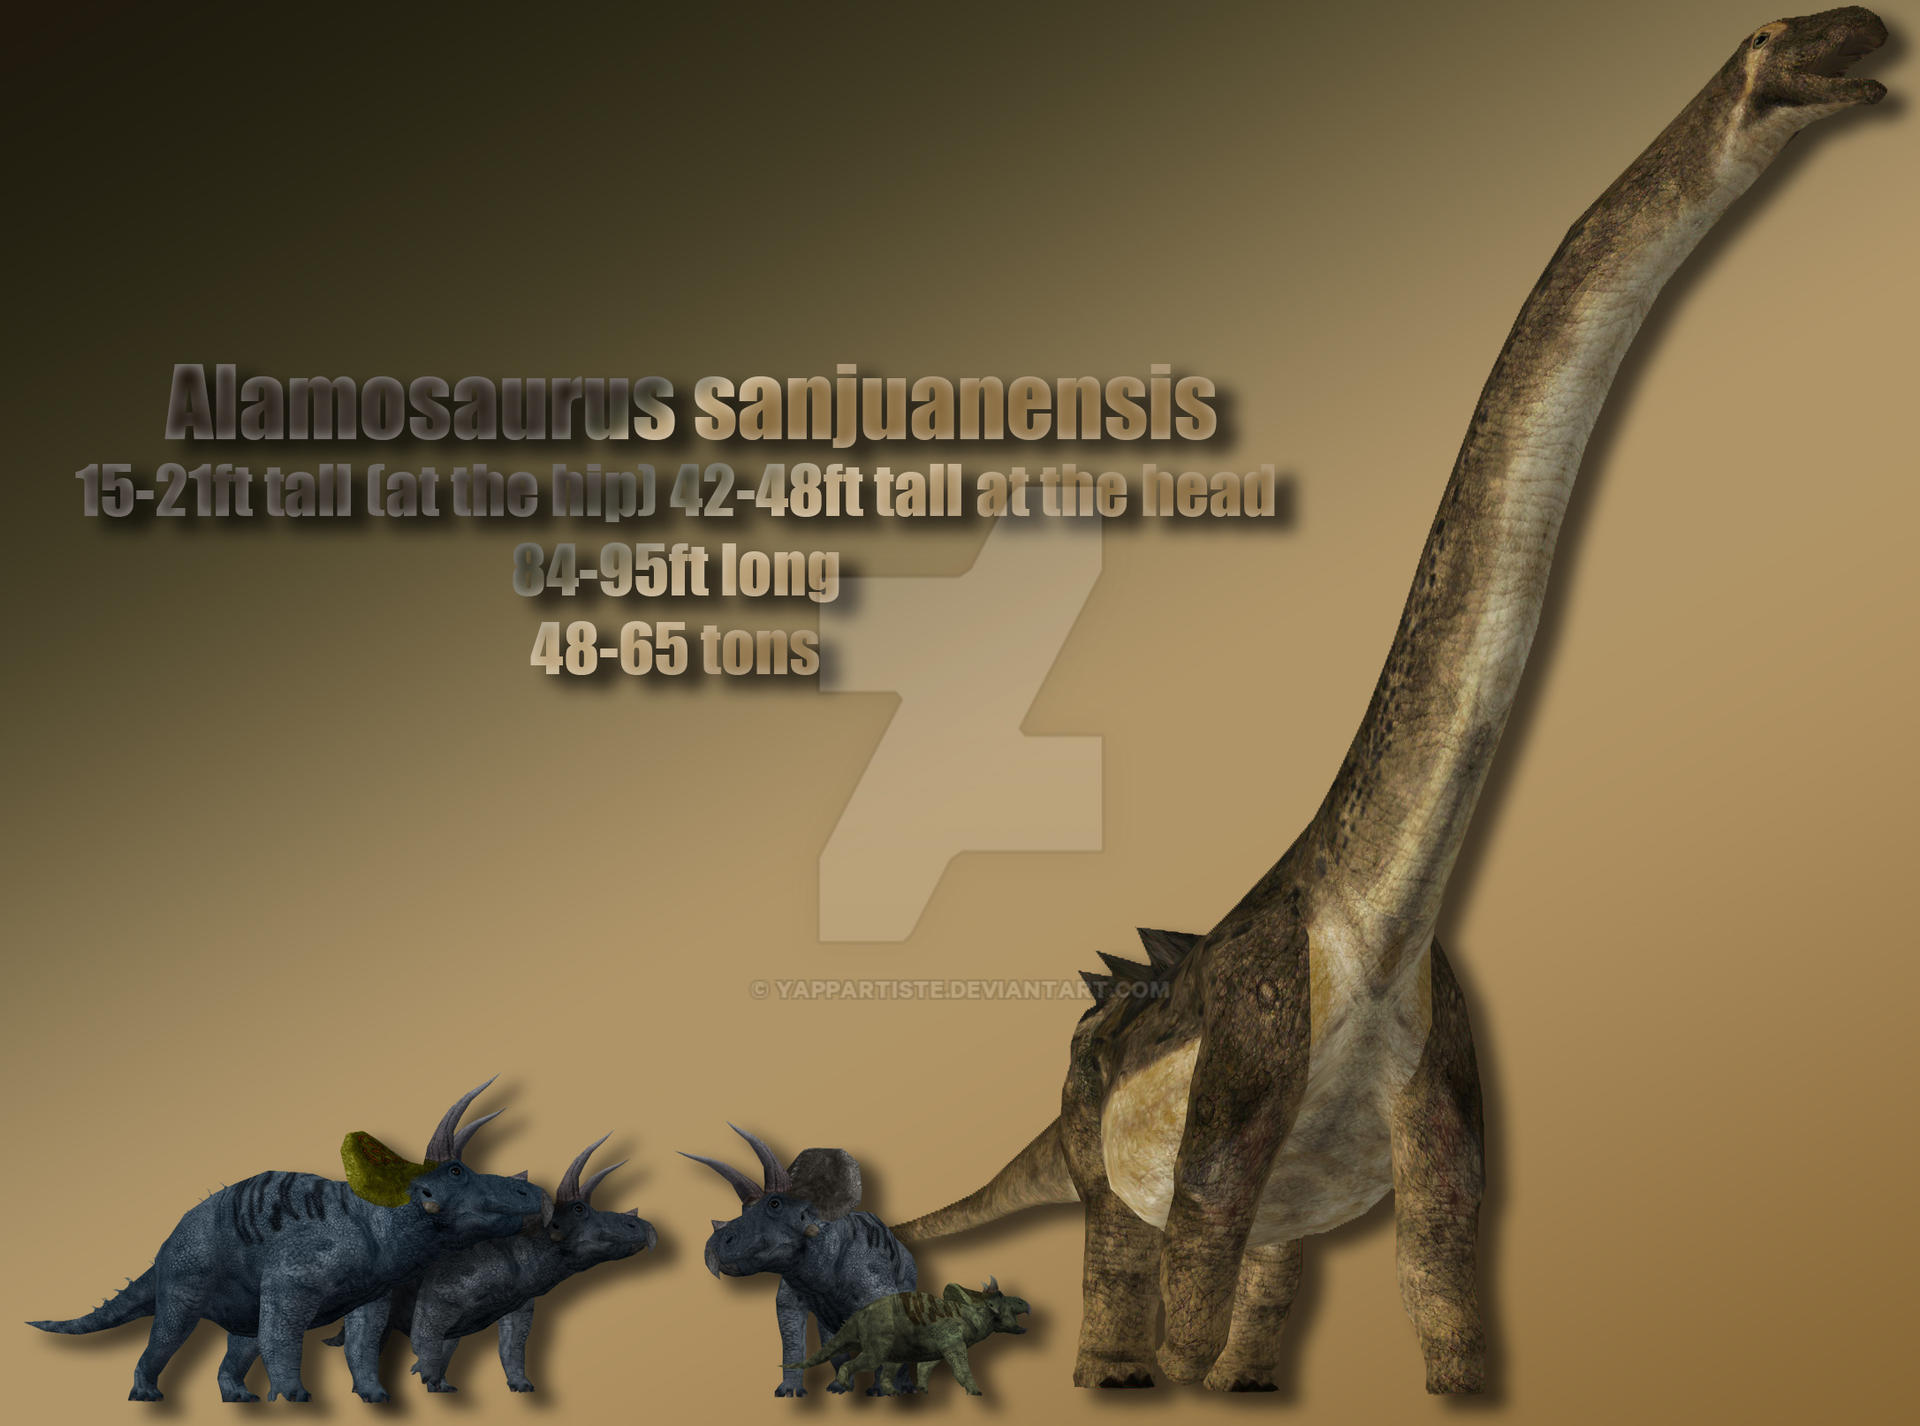 Maiasaura (Zoo Tycoon 2 World), ZT2 Download Library Wiki